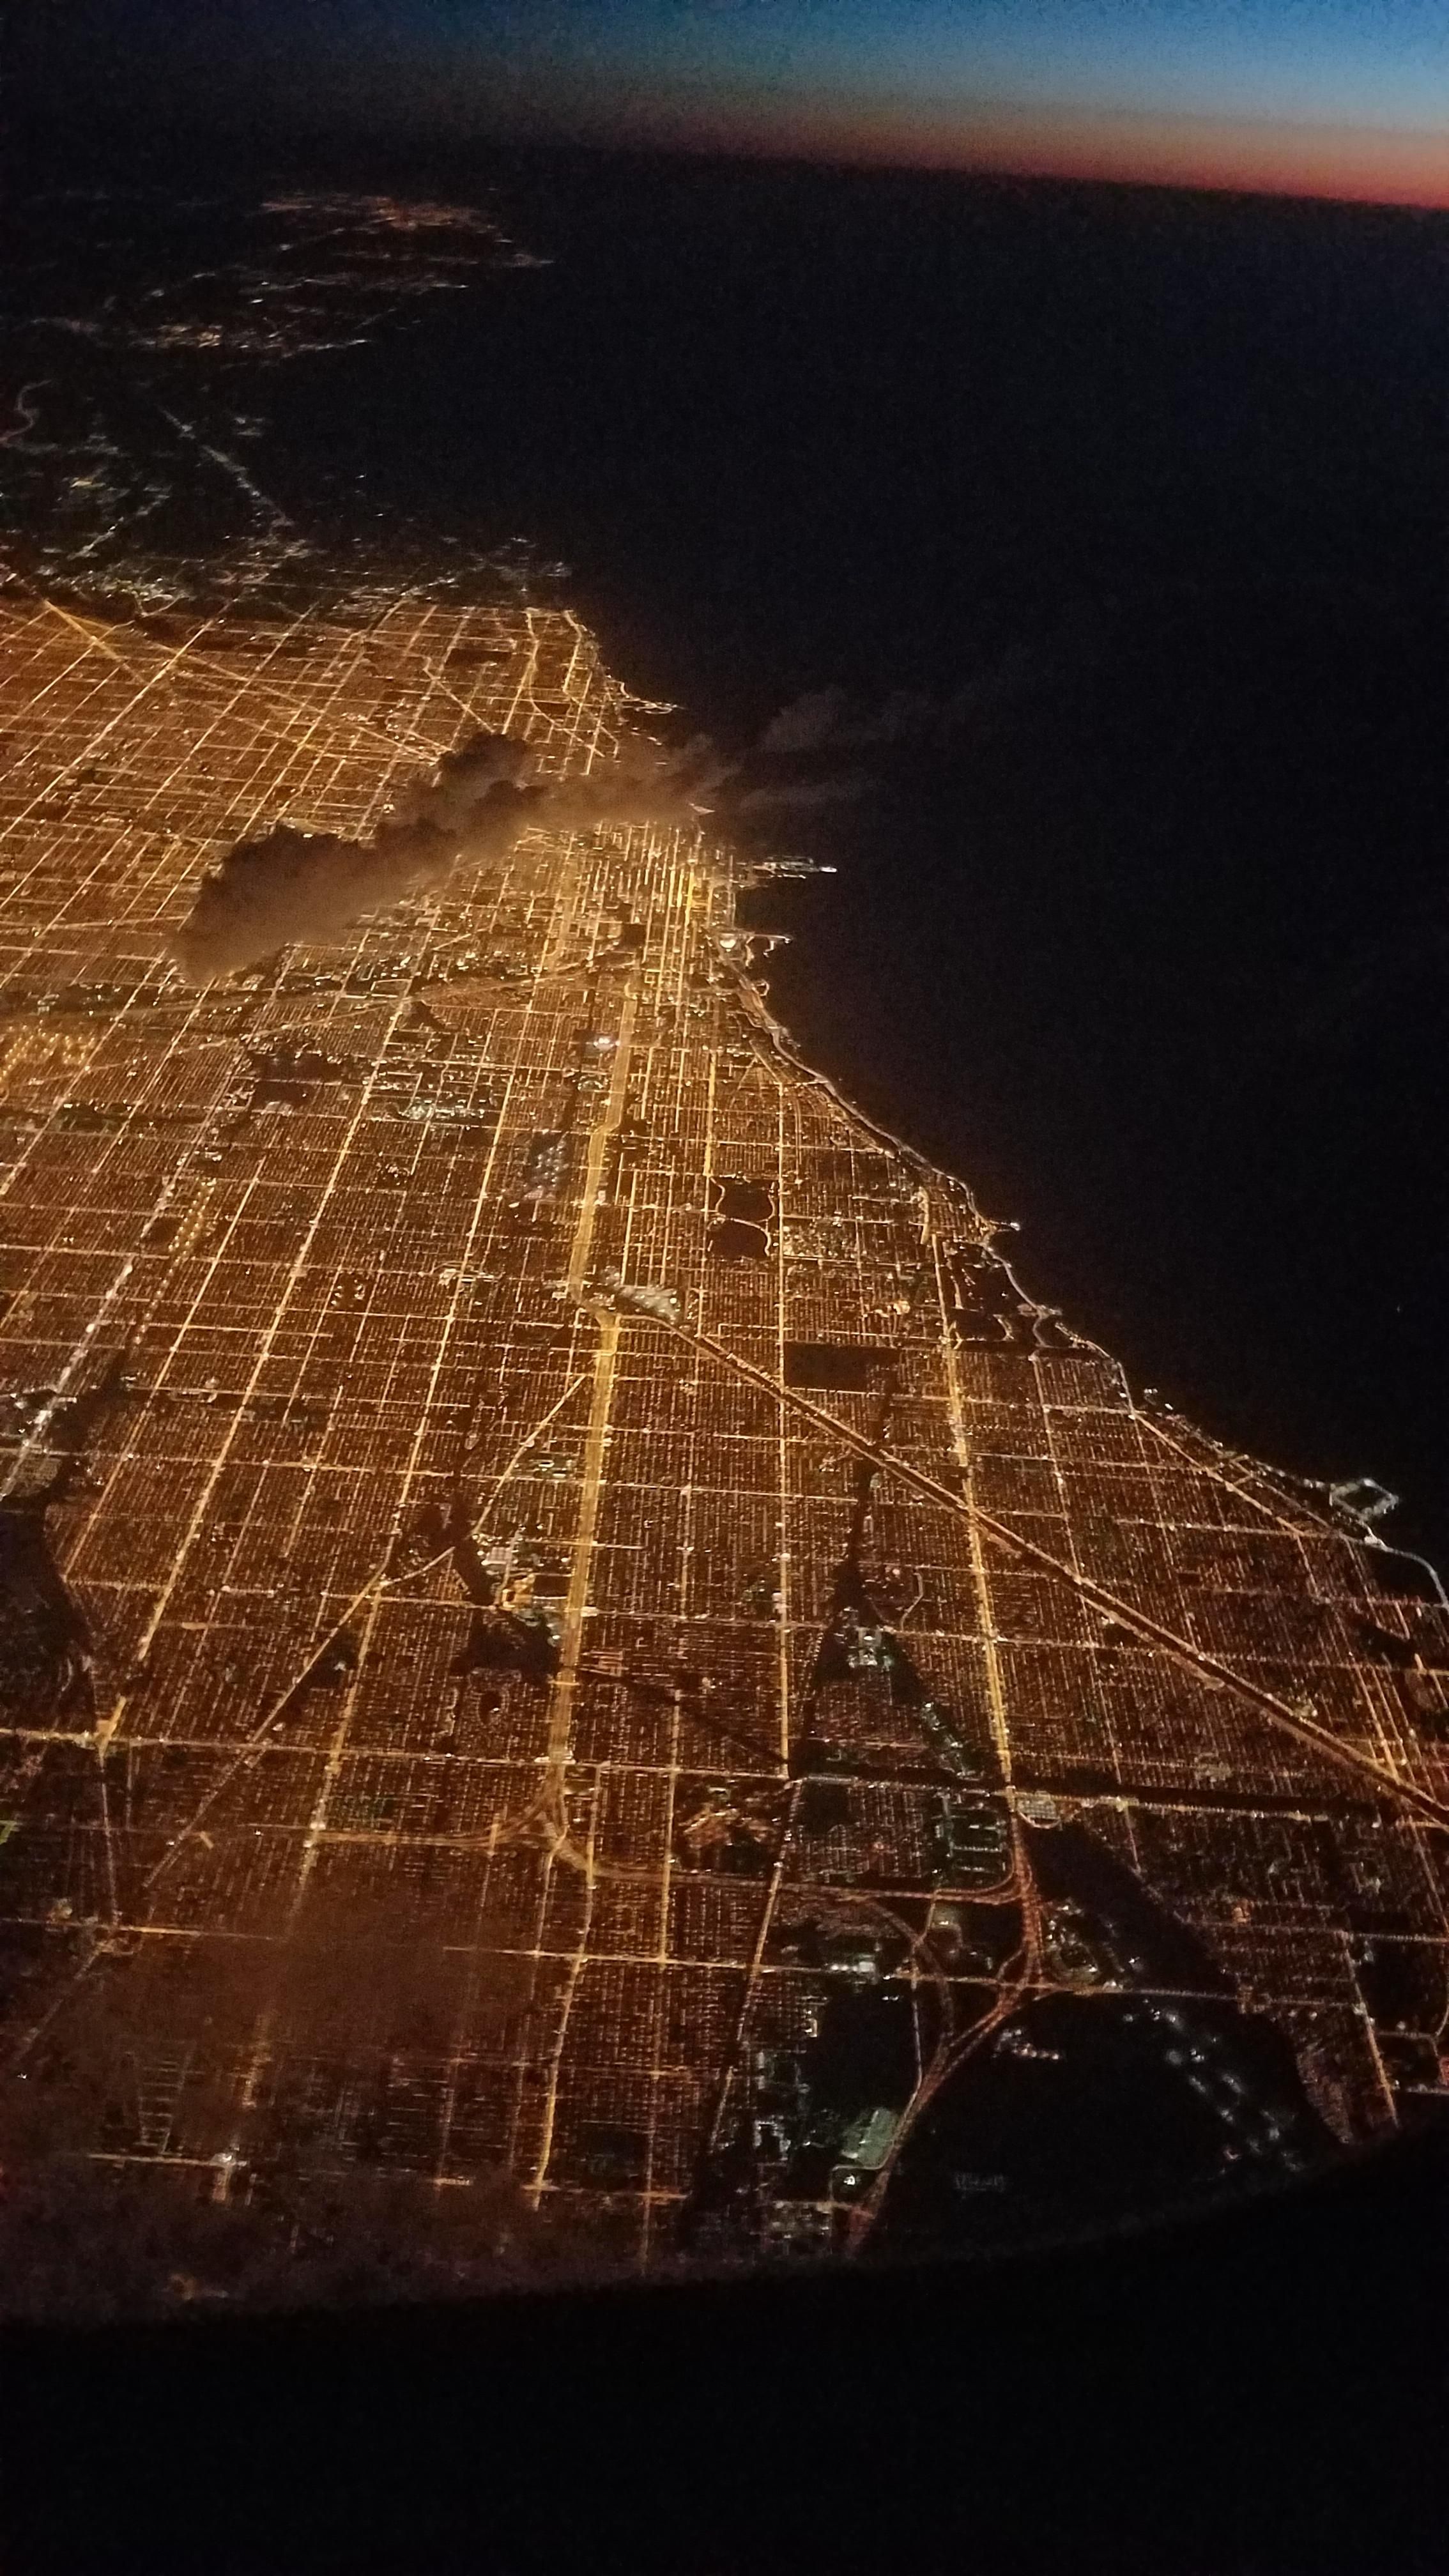 Flying over Chicago this morning